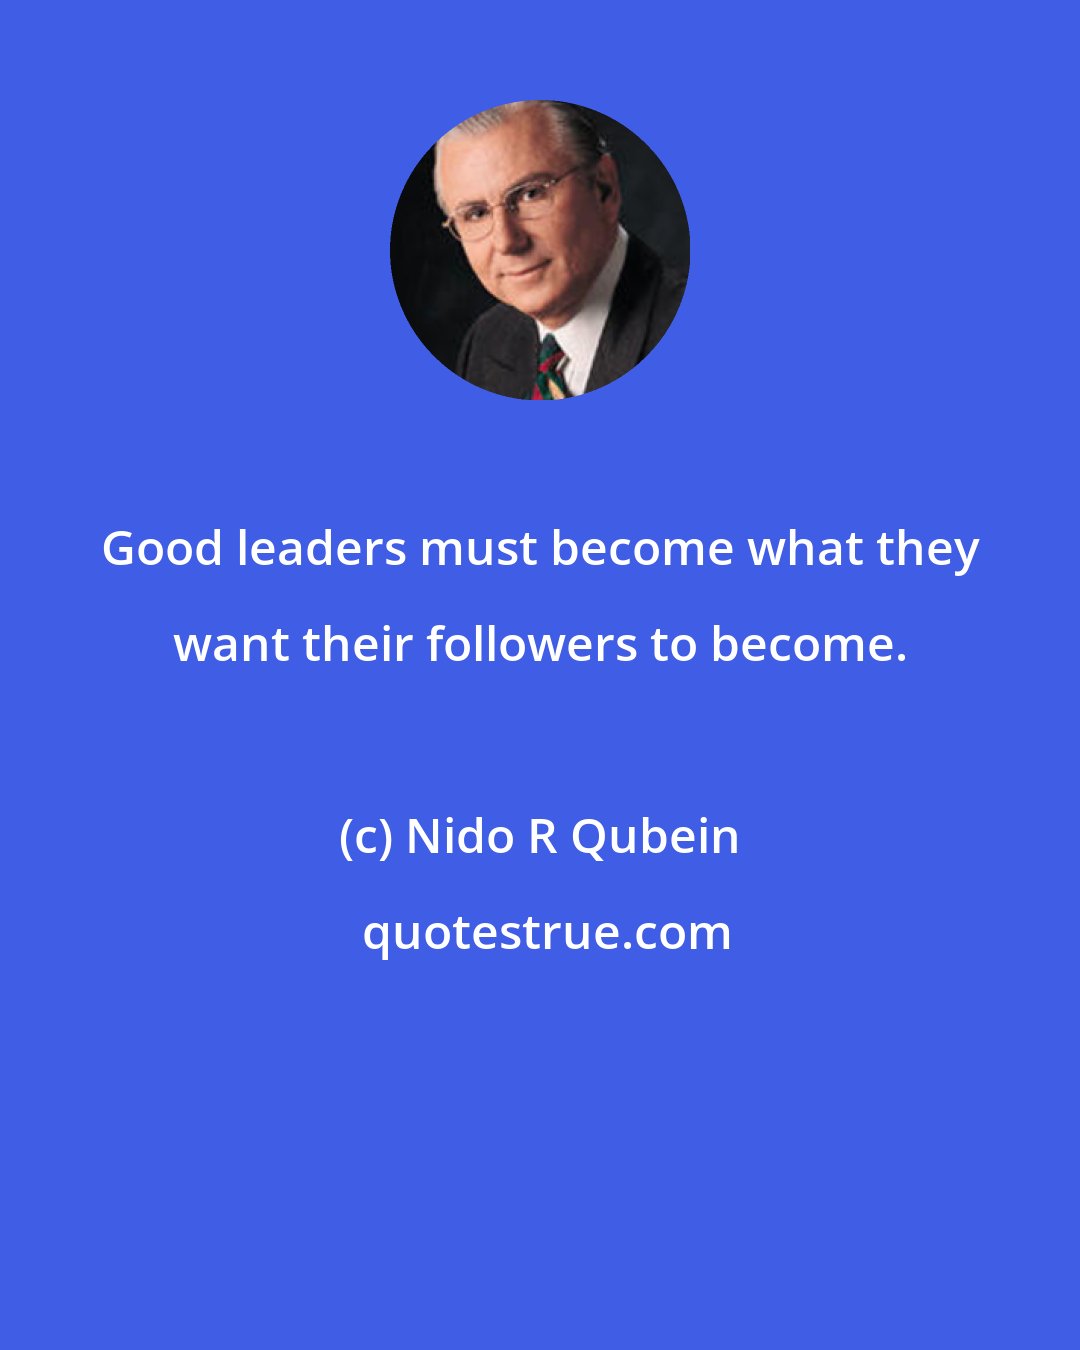 Nido R Qubein: Good leaders must become what they want their followers to become.